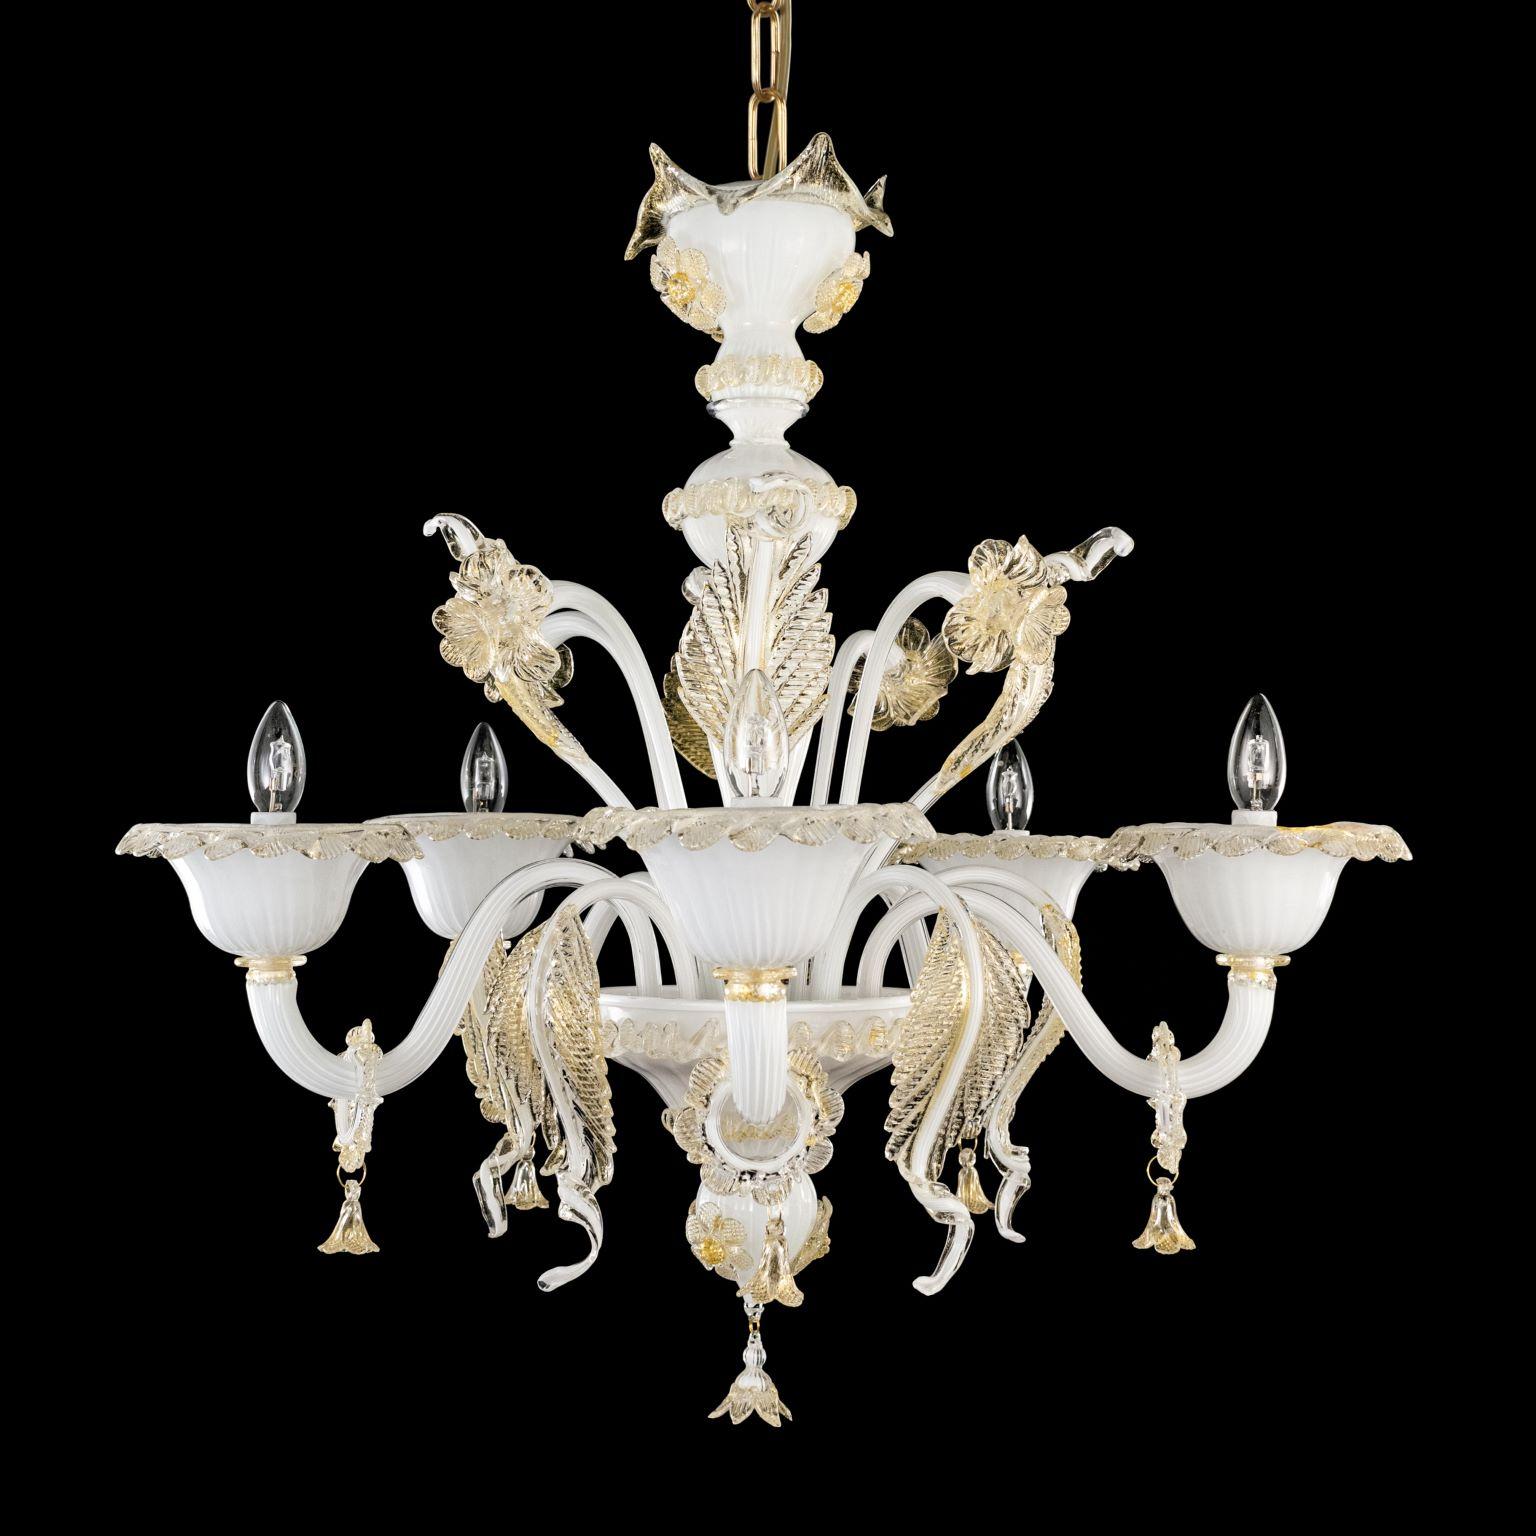 This is a classic Murano glass chandelier, as it is in the collective imagination. As many other chandeliers in our collections, this is designed with attention to details, and with the passion that makes us standing out. Each product (from the